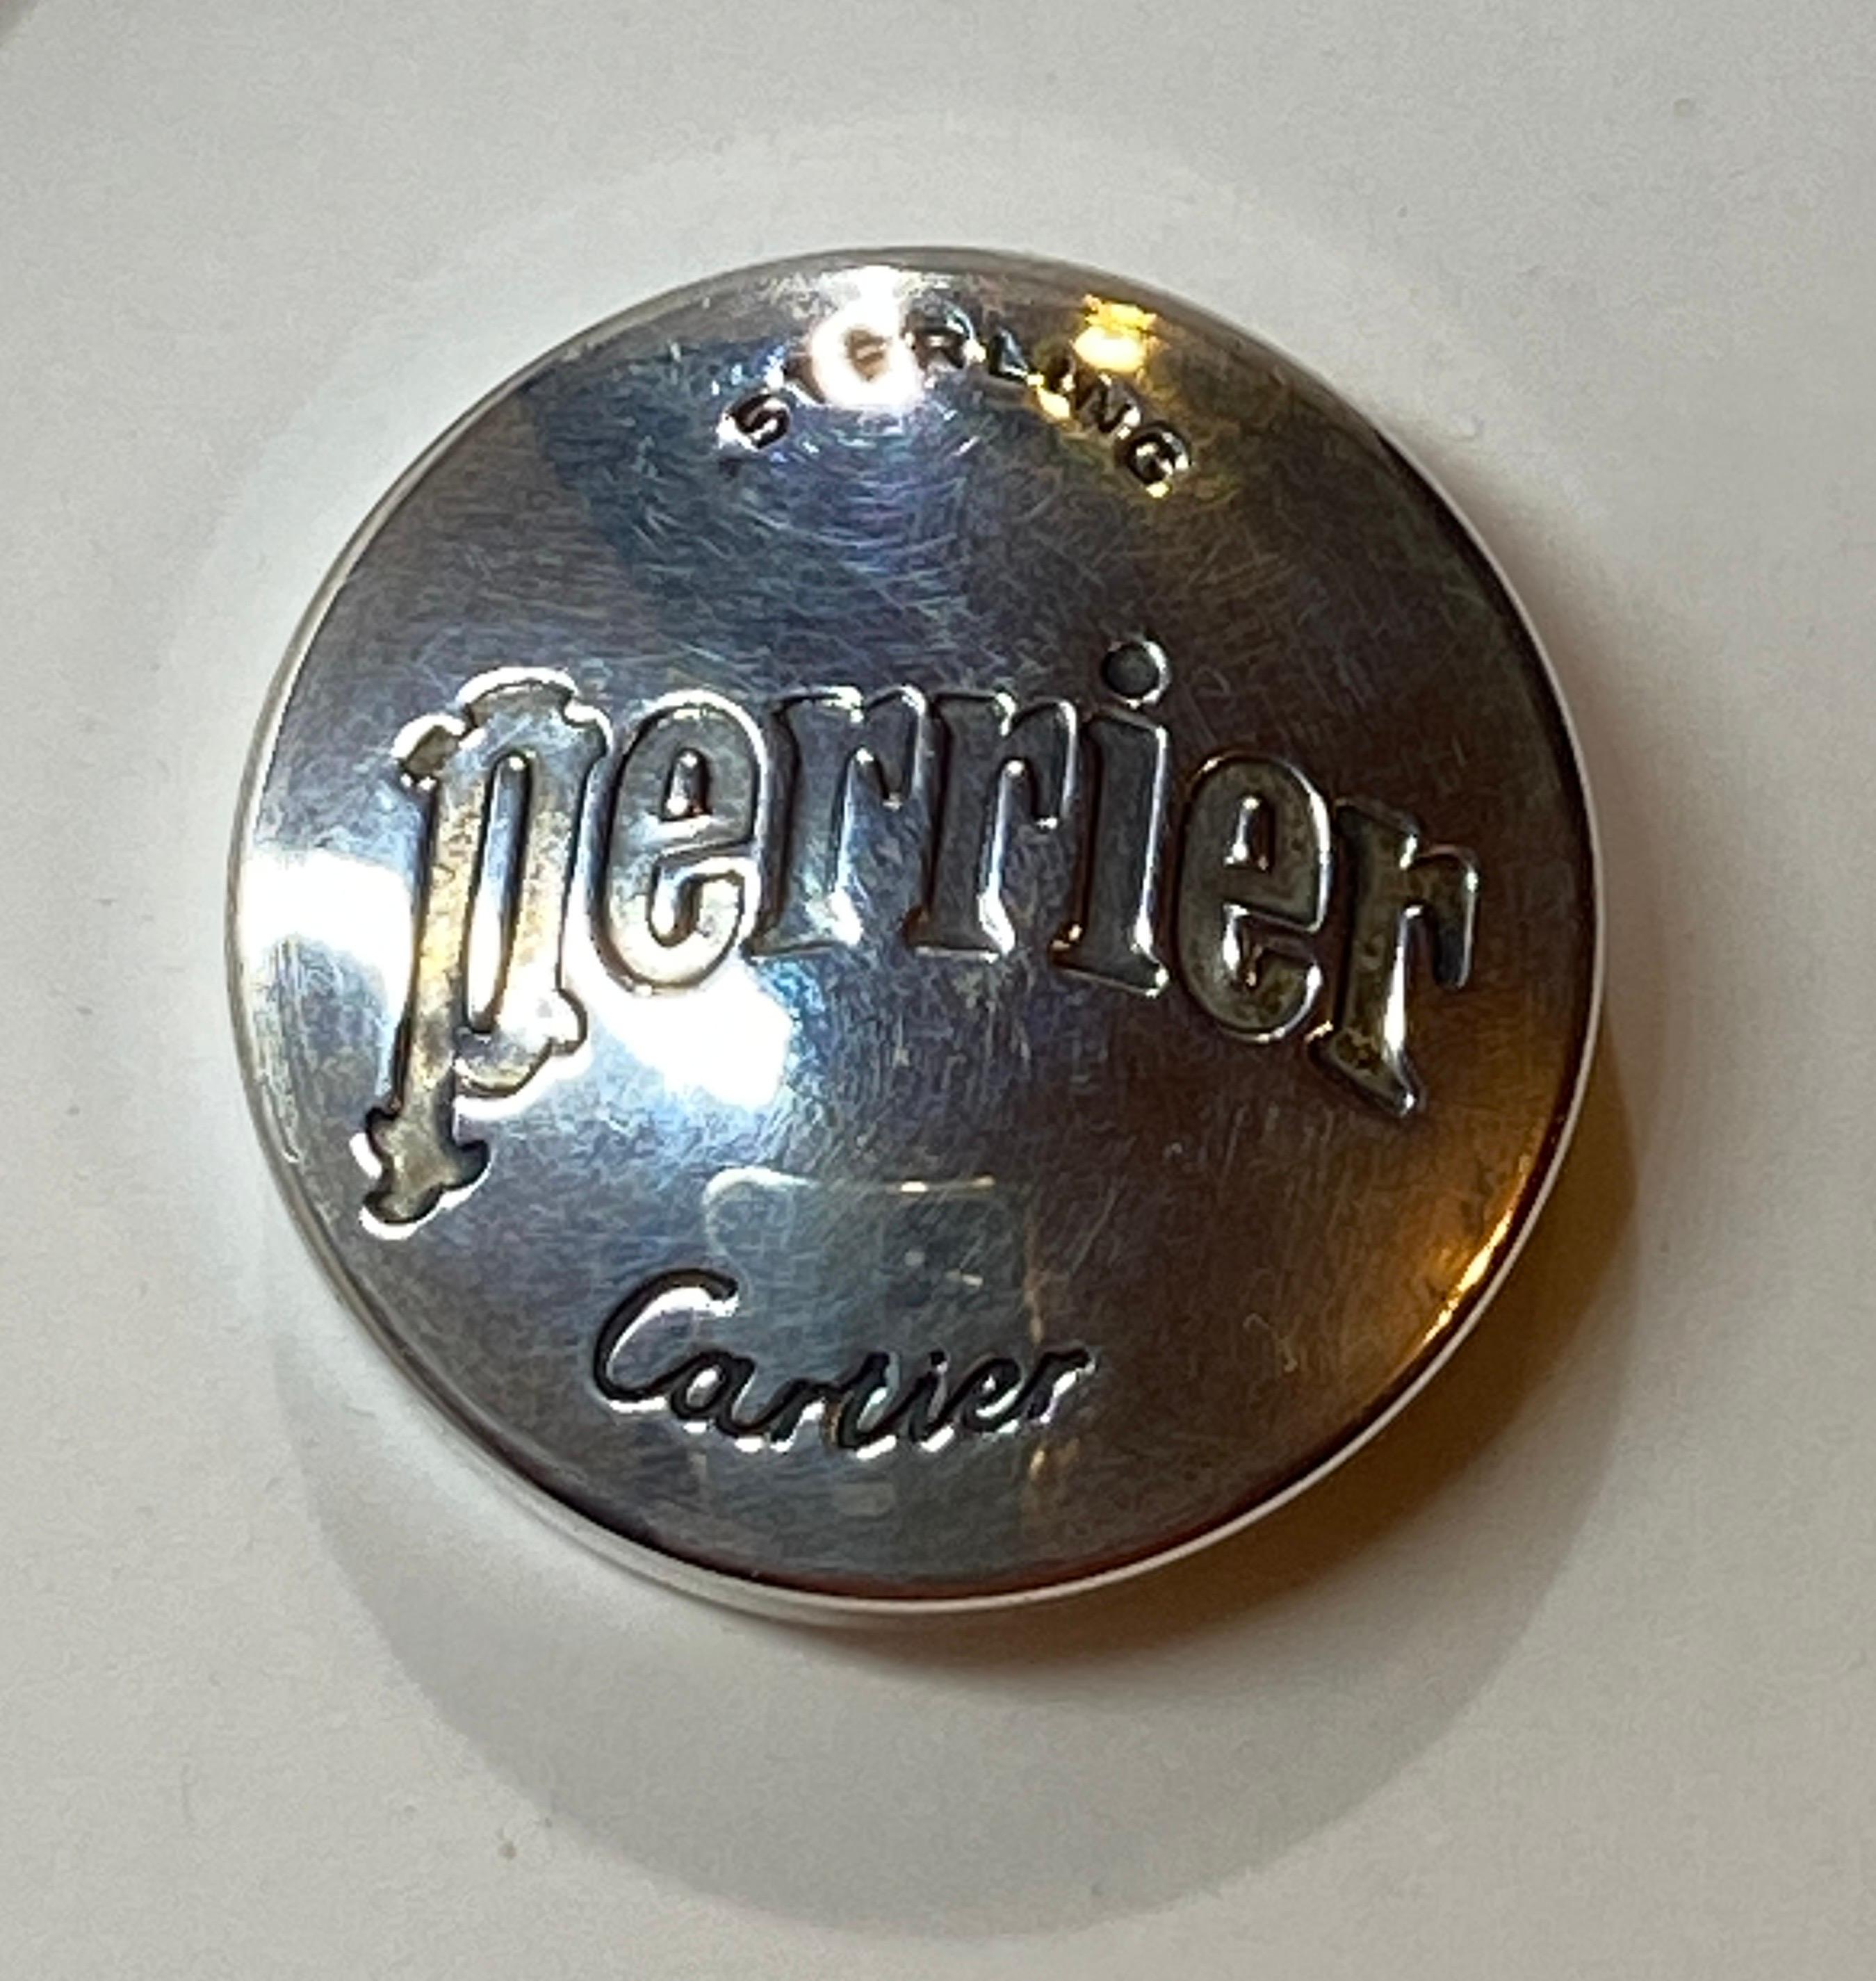 Cartier Boxed Sterling Silver Set of Perrier Bottle Caps and Bottle Opener For Sale 11